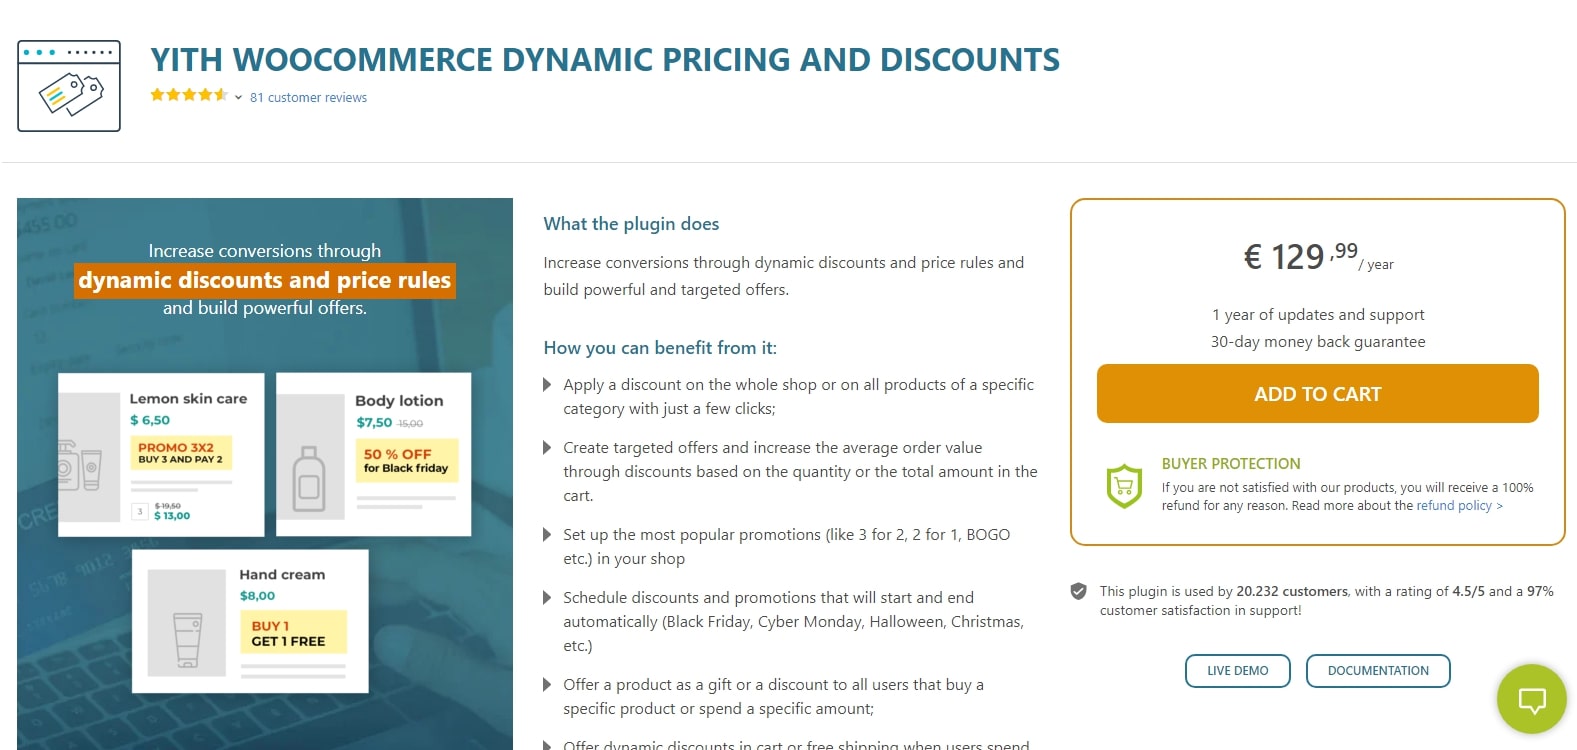 YITH WooCommerce Dynamic pricing and discounts